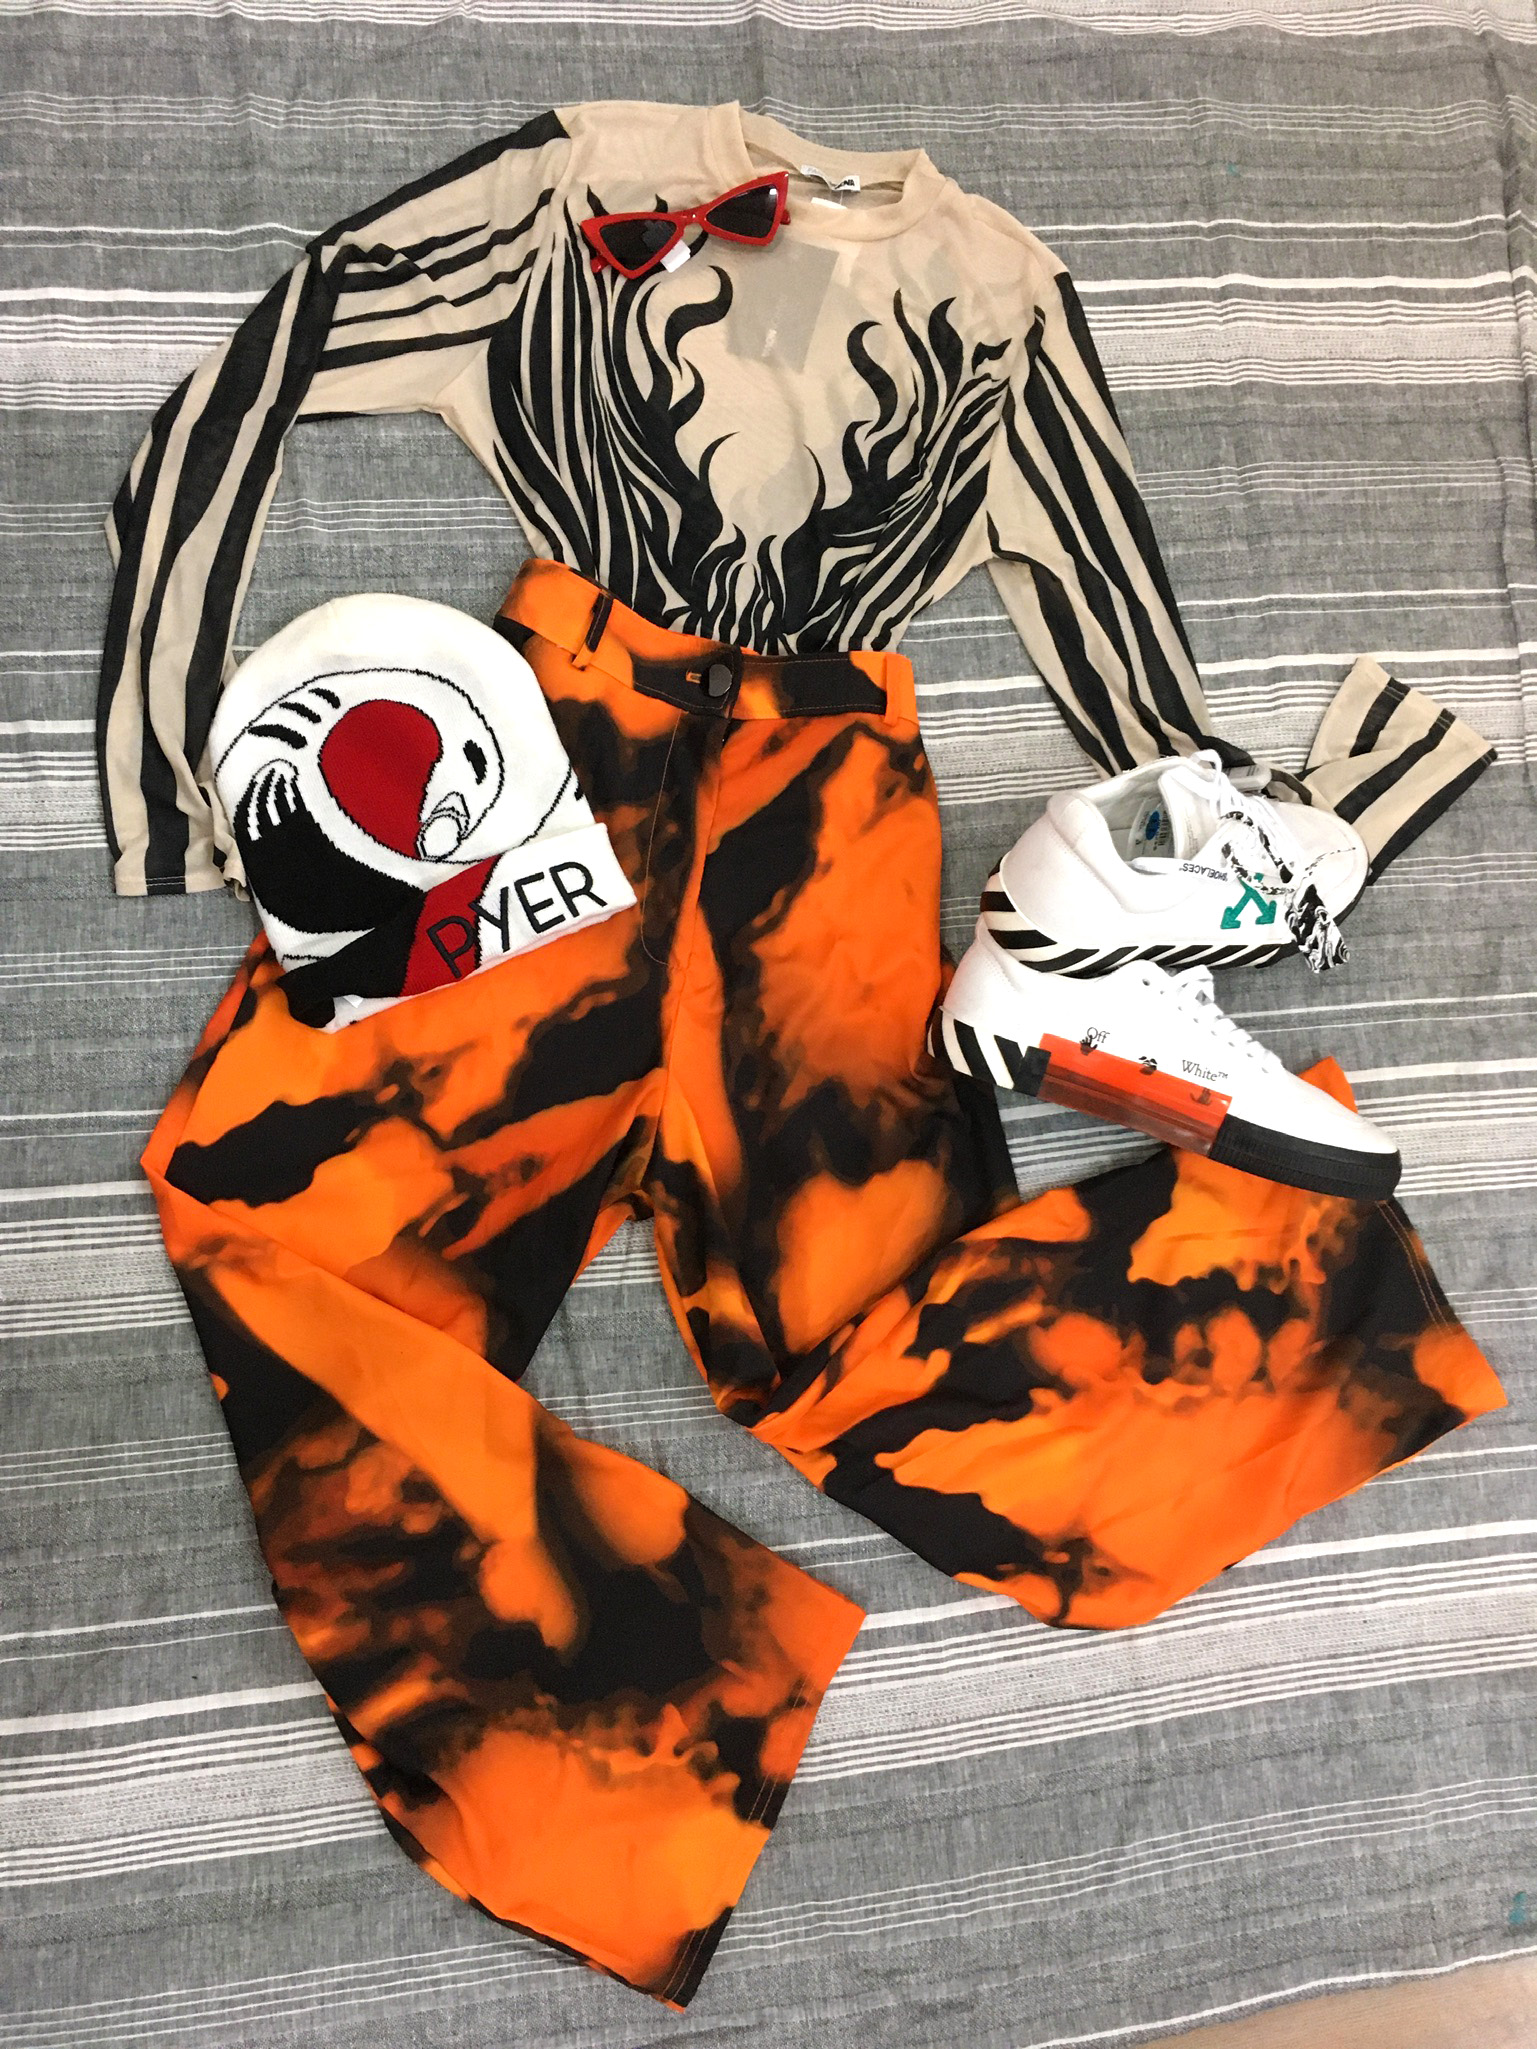 clothing laid flat, mesh longs sleeve top with swirling black pattern, orange and black tie-dyed pants, white sneakers and Pyer Moss logo beanie